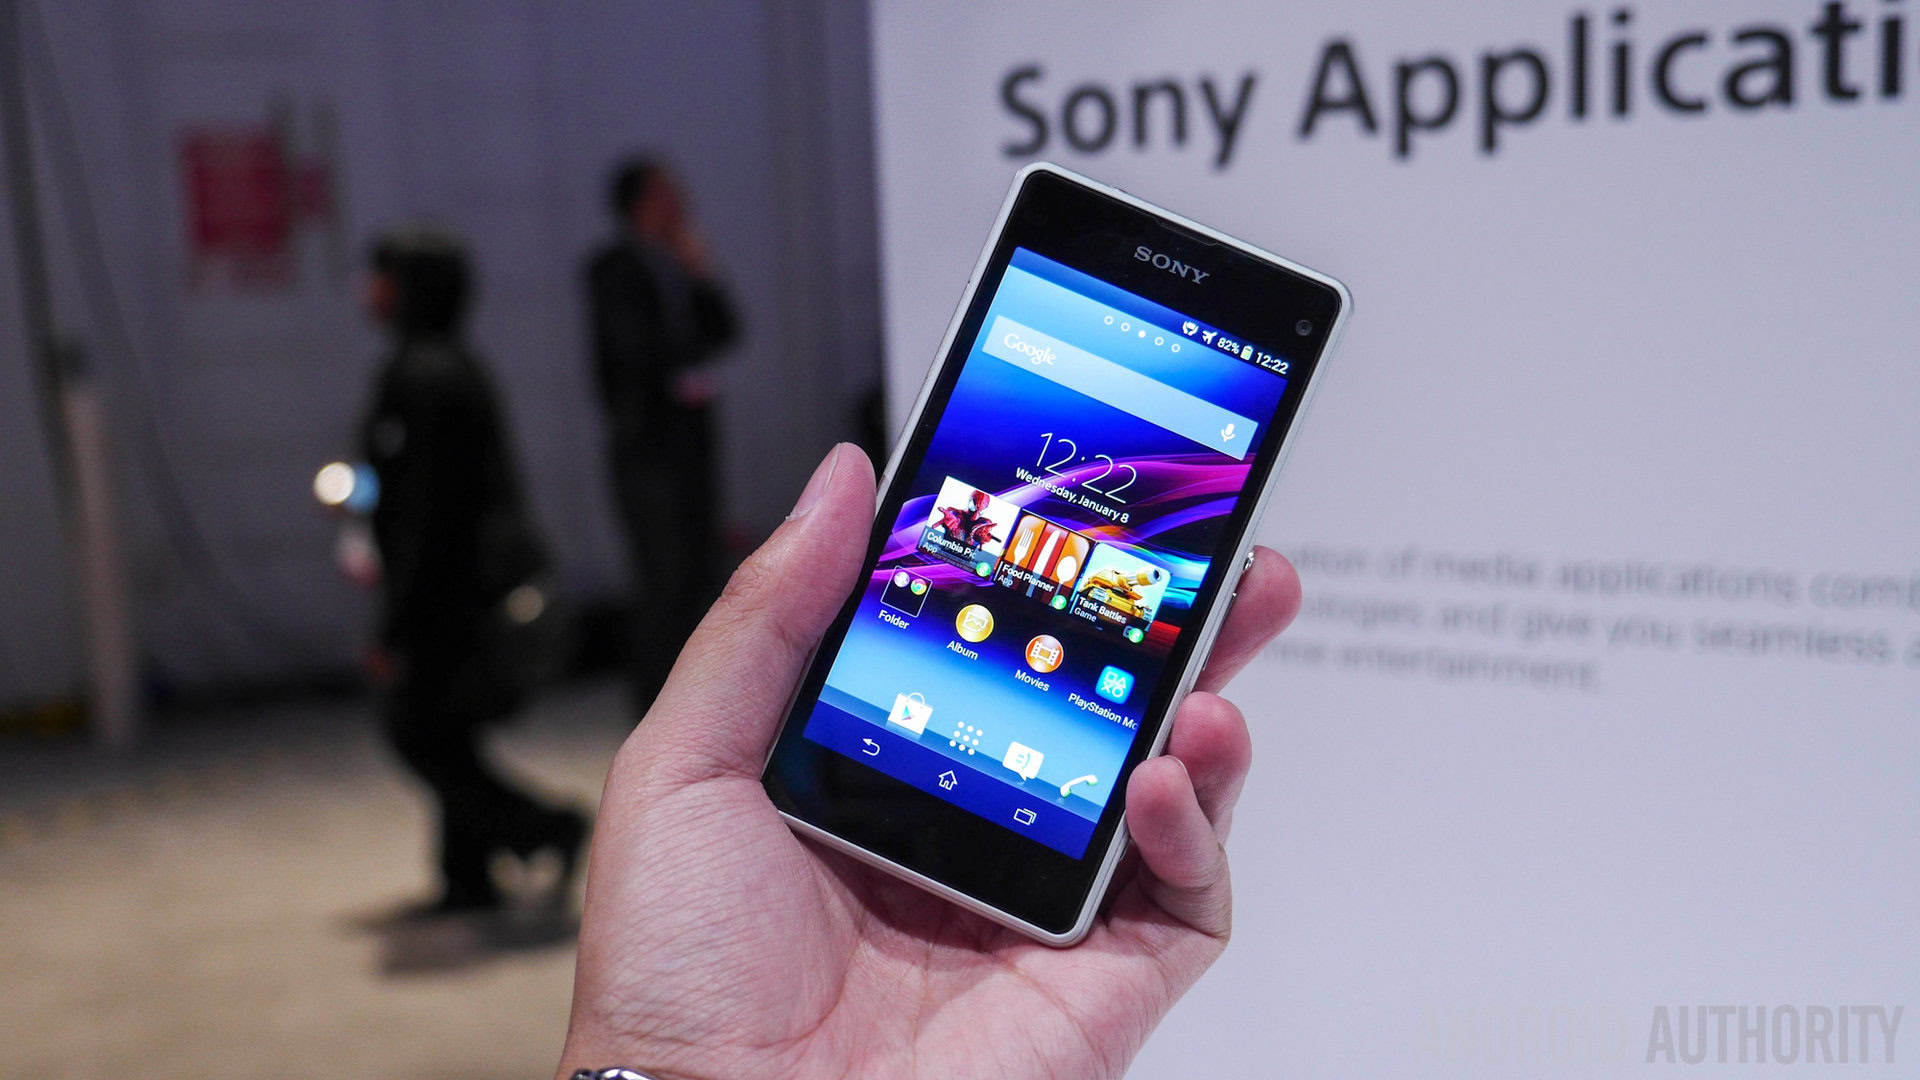 Sony Xperia Z1 Compact Z1 mini hands on AA -5